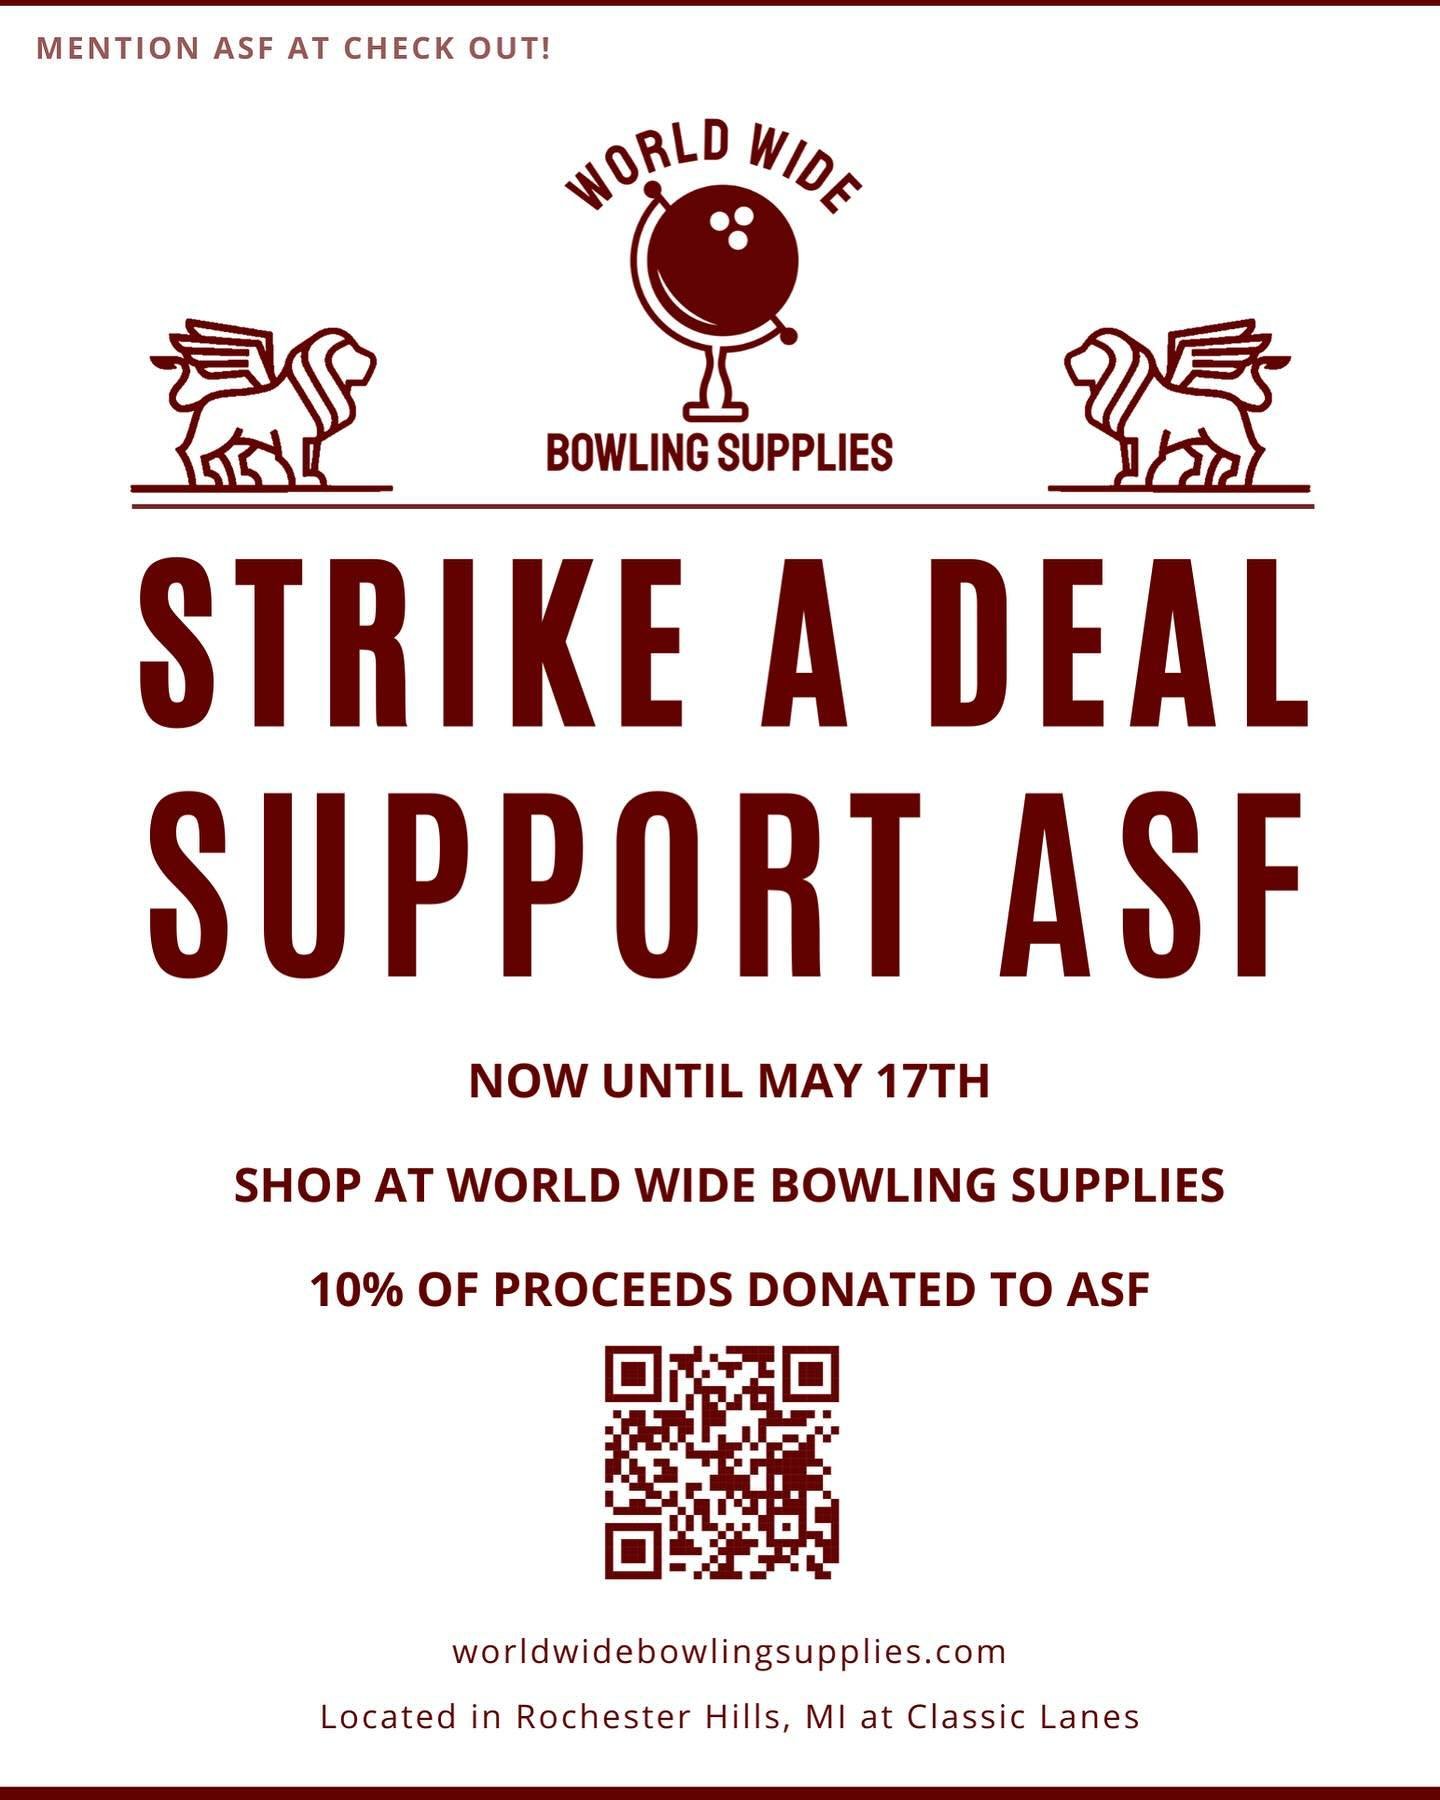 STRIKE A DEAL AND SUPPORT ASF! 🎳 

Classic Lanes Bowling Pro Shop in Rochester Hills, MI, your go-to for worldwide bowling supplies, is generously donating 10% of proceeds from now until May 17th. Now&rsquo;s the perfect time to gear up for the even